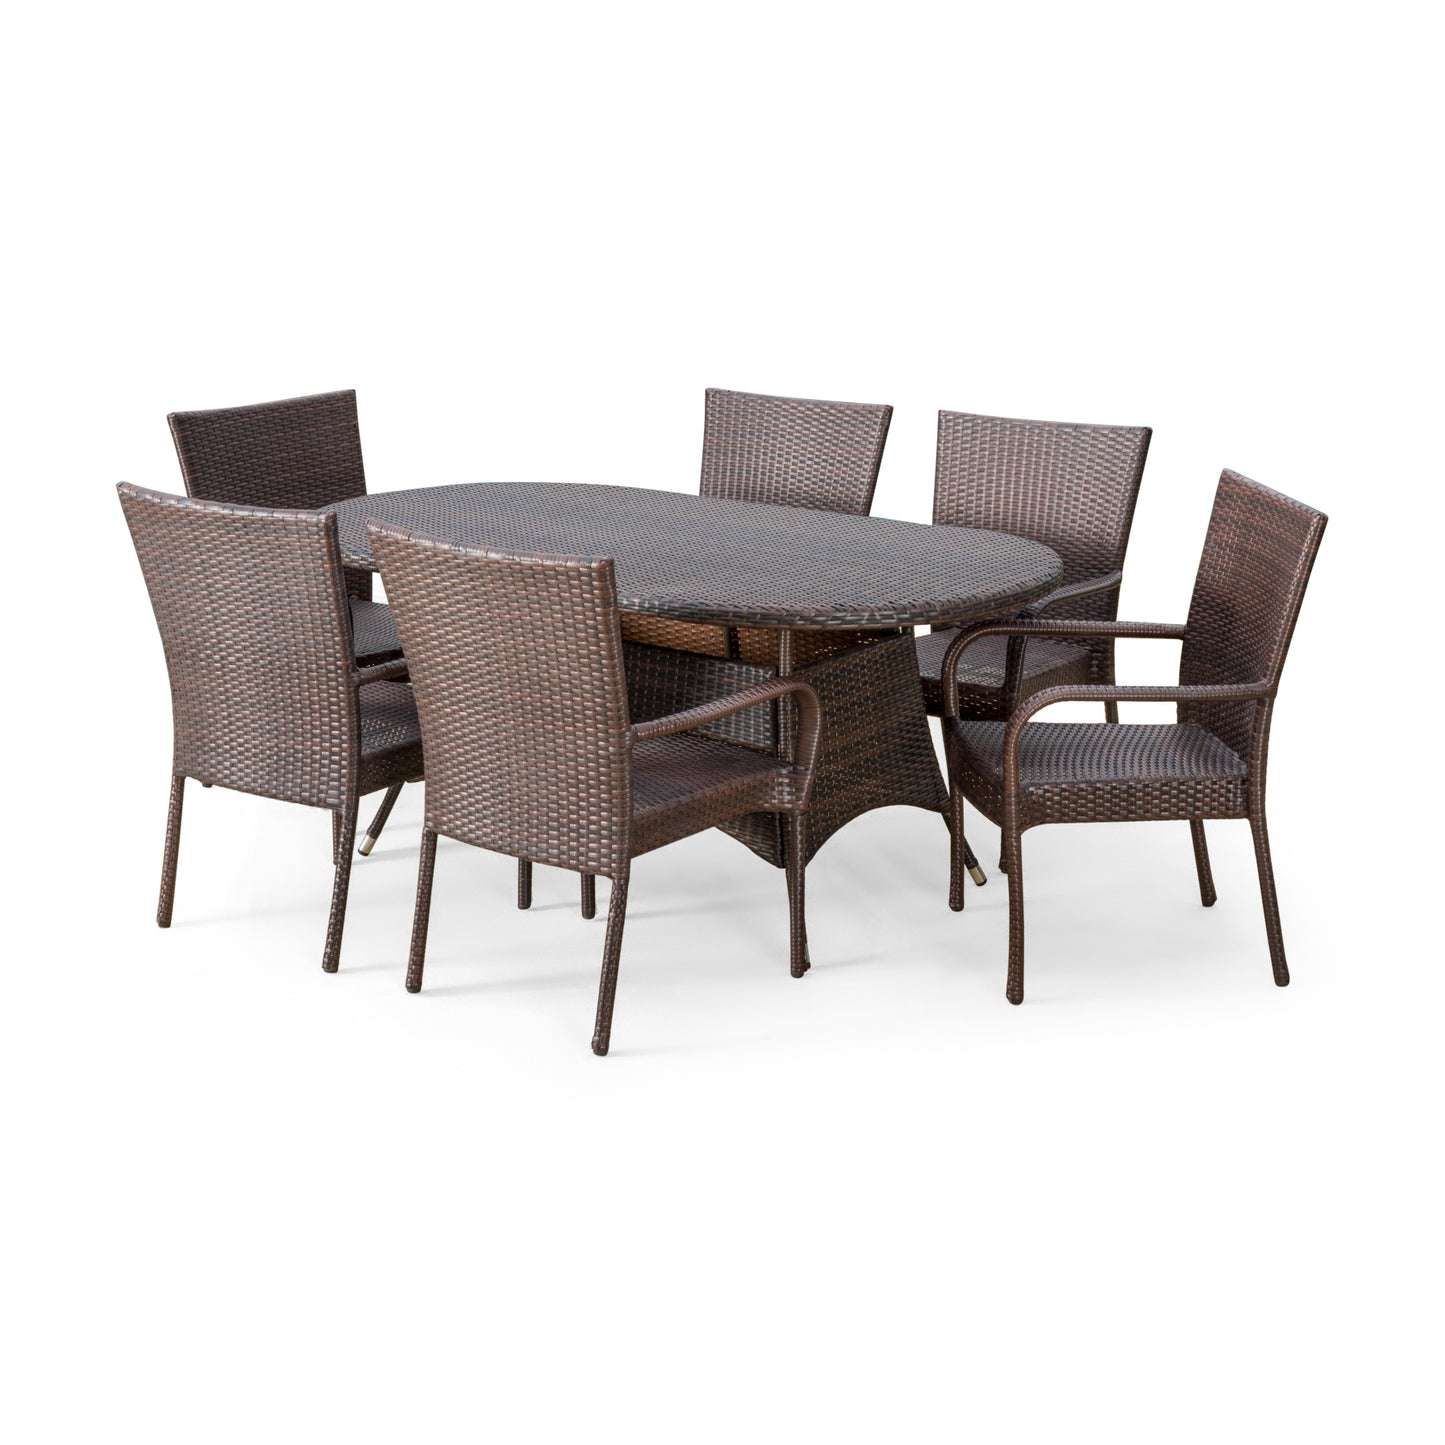 Kory Outdoor 7pc Multibrown Wicker Round Dining Set